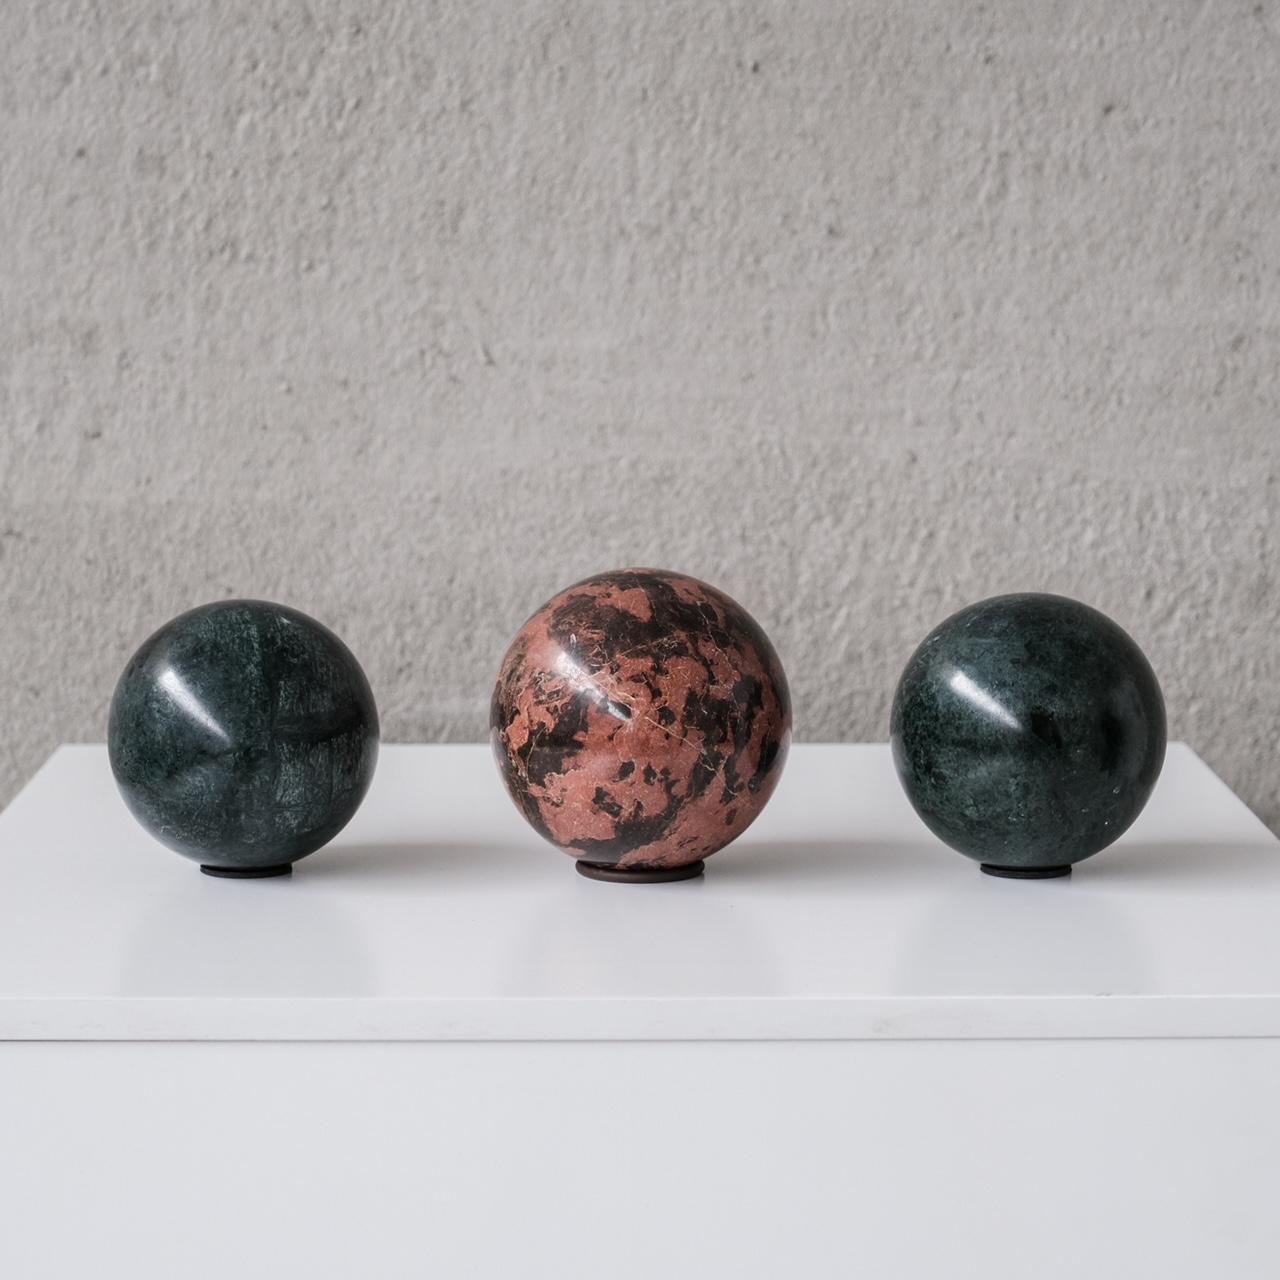 A set of three marble specimens. 

Belgium, circa 1970s. 

Formed in spheres. 

Two green specimens - 8.5 diameter, a slightly larger sphere at 10 diameter in cm. 

Price is for the set of three. 

Location: Belgium Gallery. 

Dimensions: 10